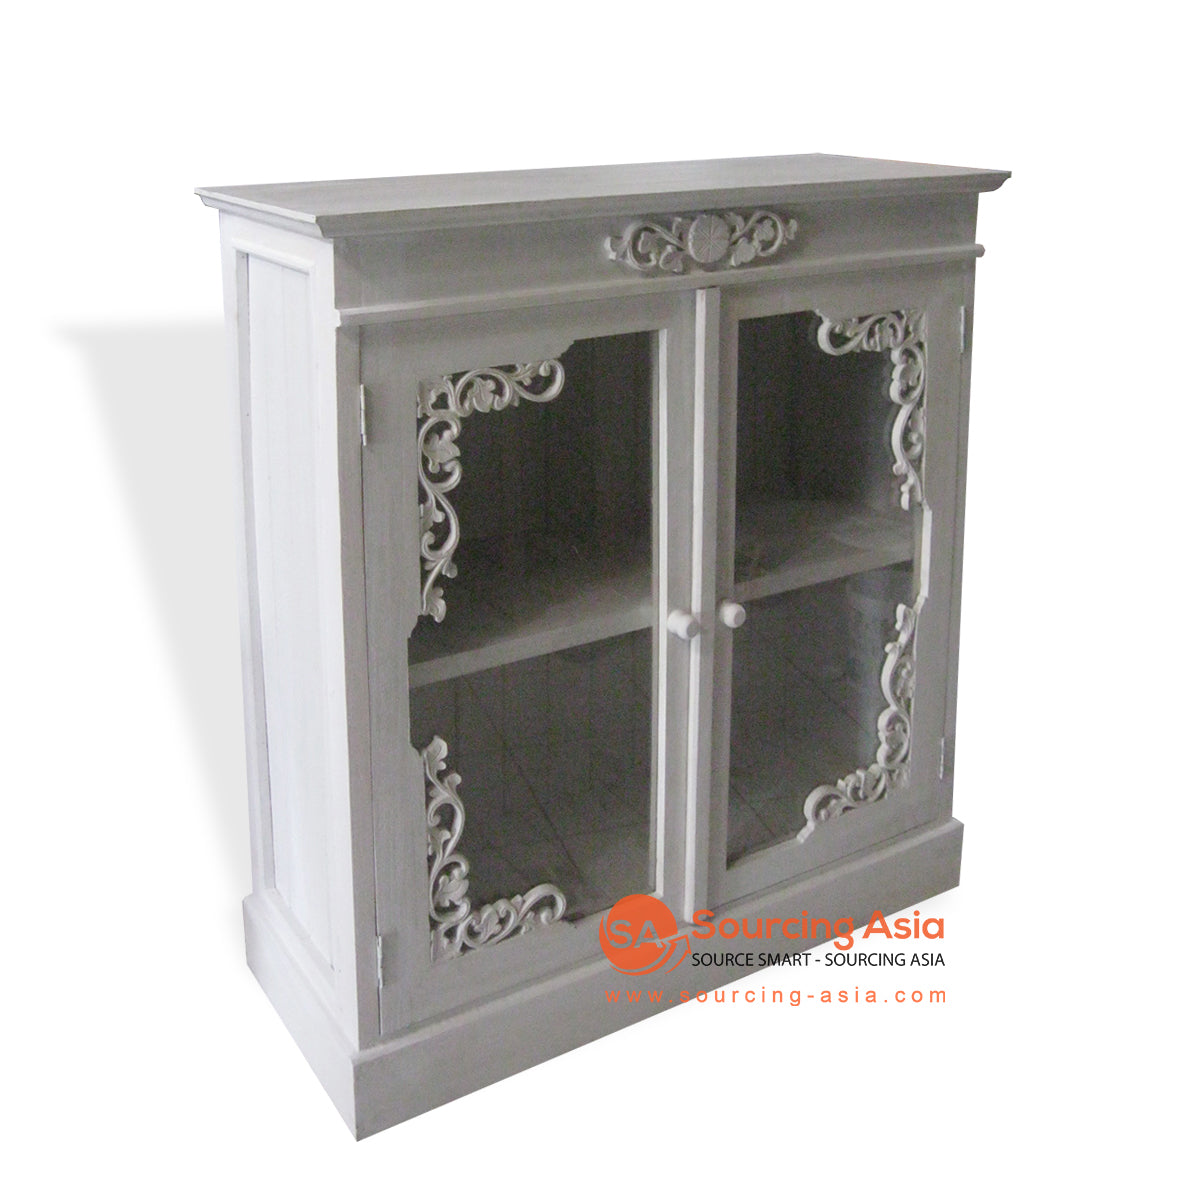 THE012 WHITE WASH WOODEN BOOK SHELF WITH GLASS